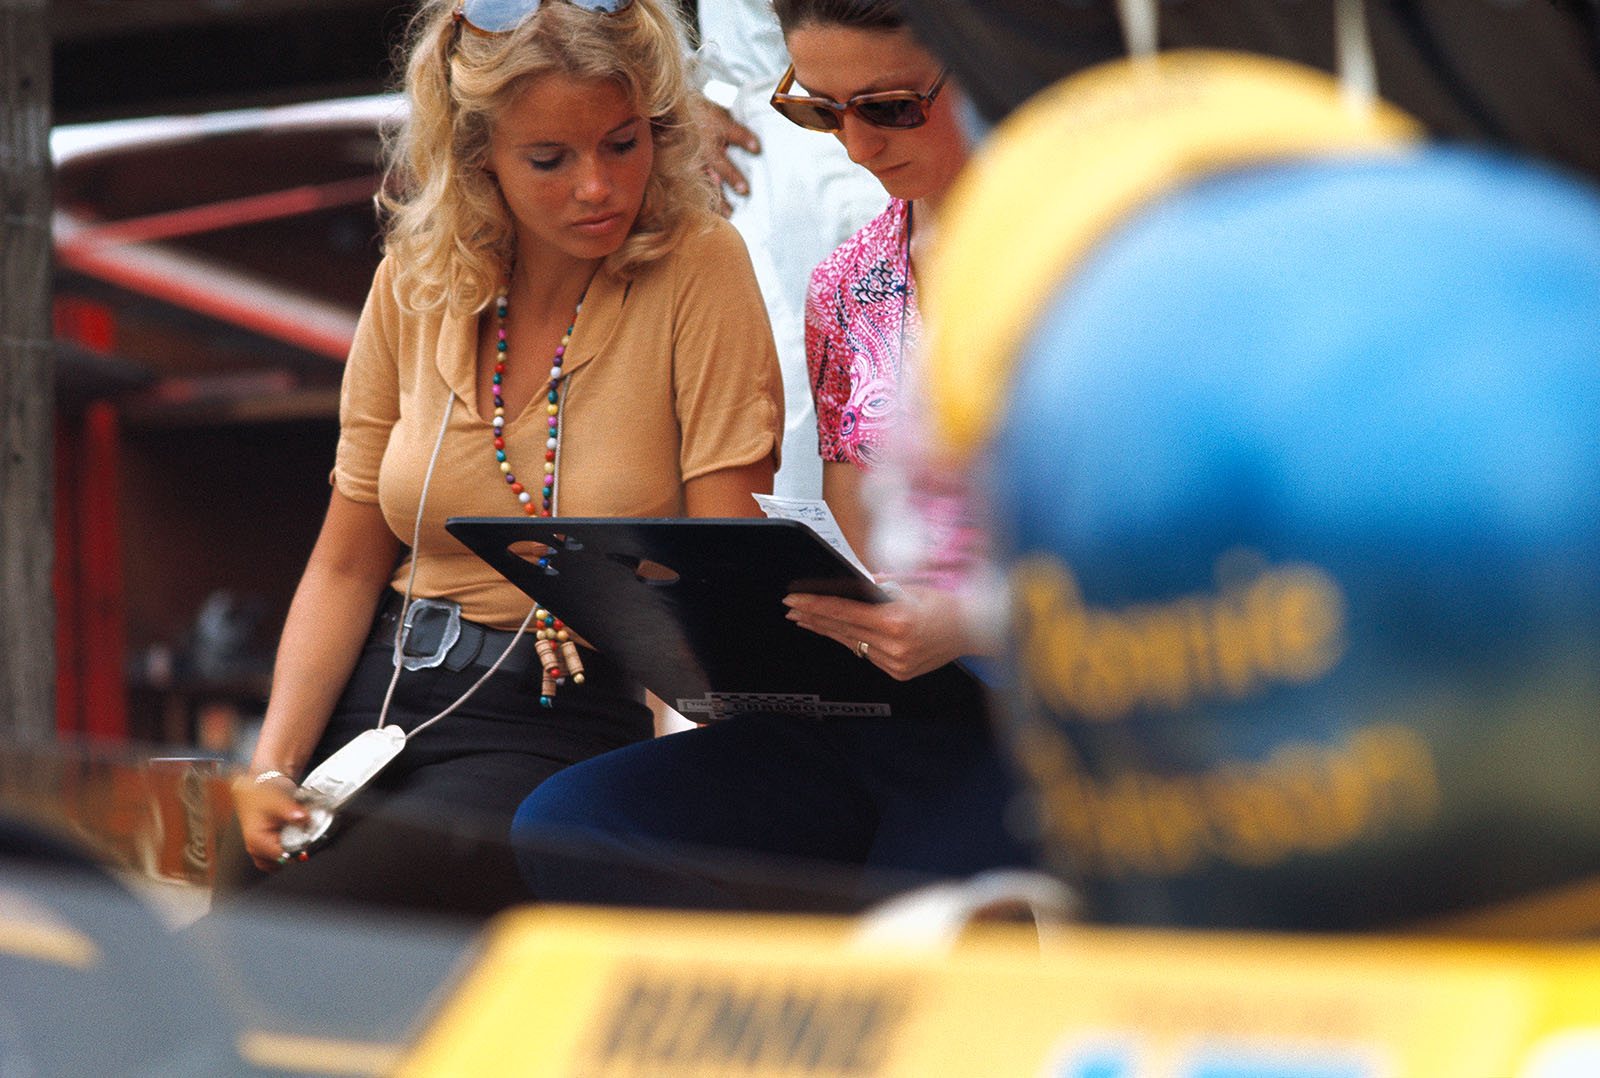 Barbro Peterson keeps her husband Ronnie's times (you can see Ronnie's helmet in the foreground) together with Siffert's wife Simone in the March pits during the German GP weekend in Hockenheim in August 1970. 